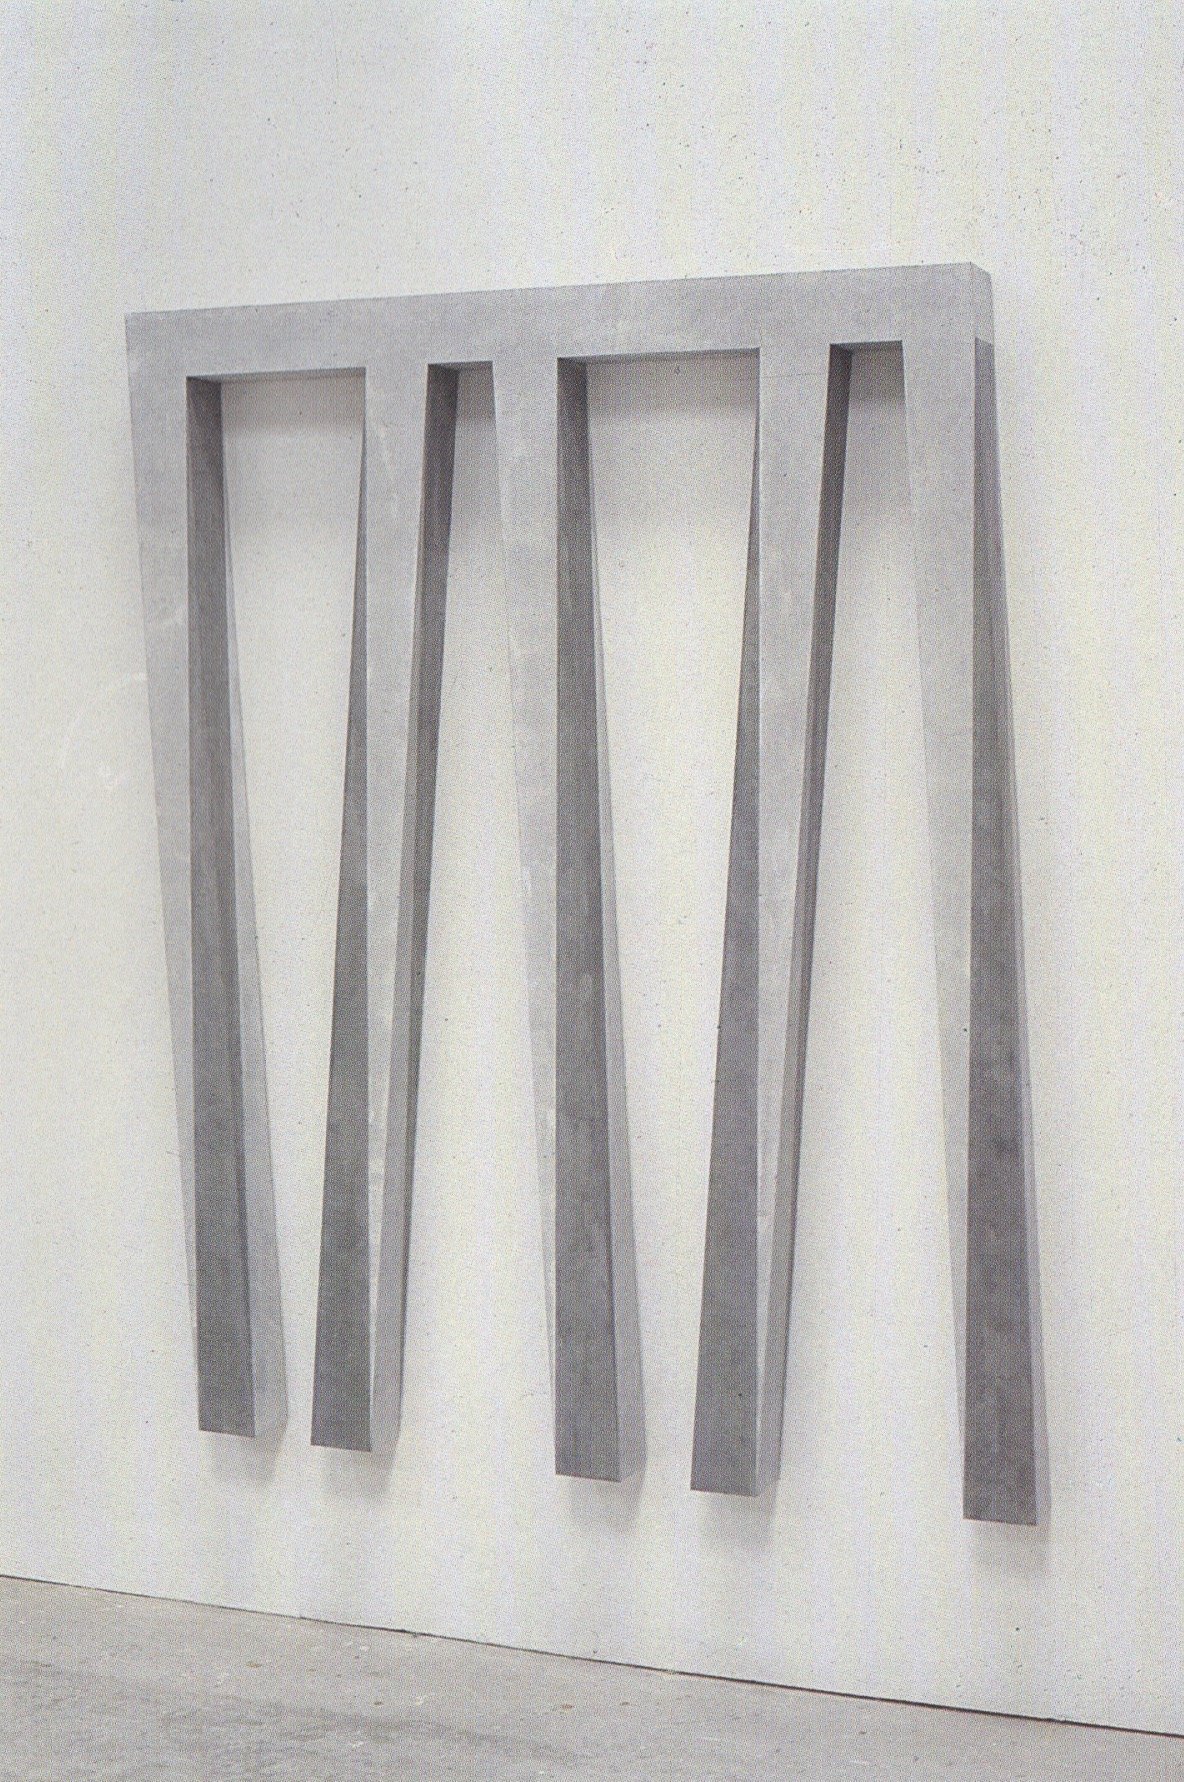 fig. 8: &quot;untitled theme: vertical divisions&quot; (1986), acrylic, marble on wood, 173 x 142 x 10 cm